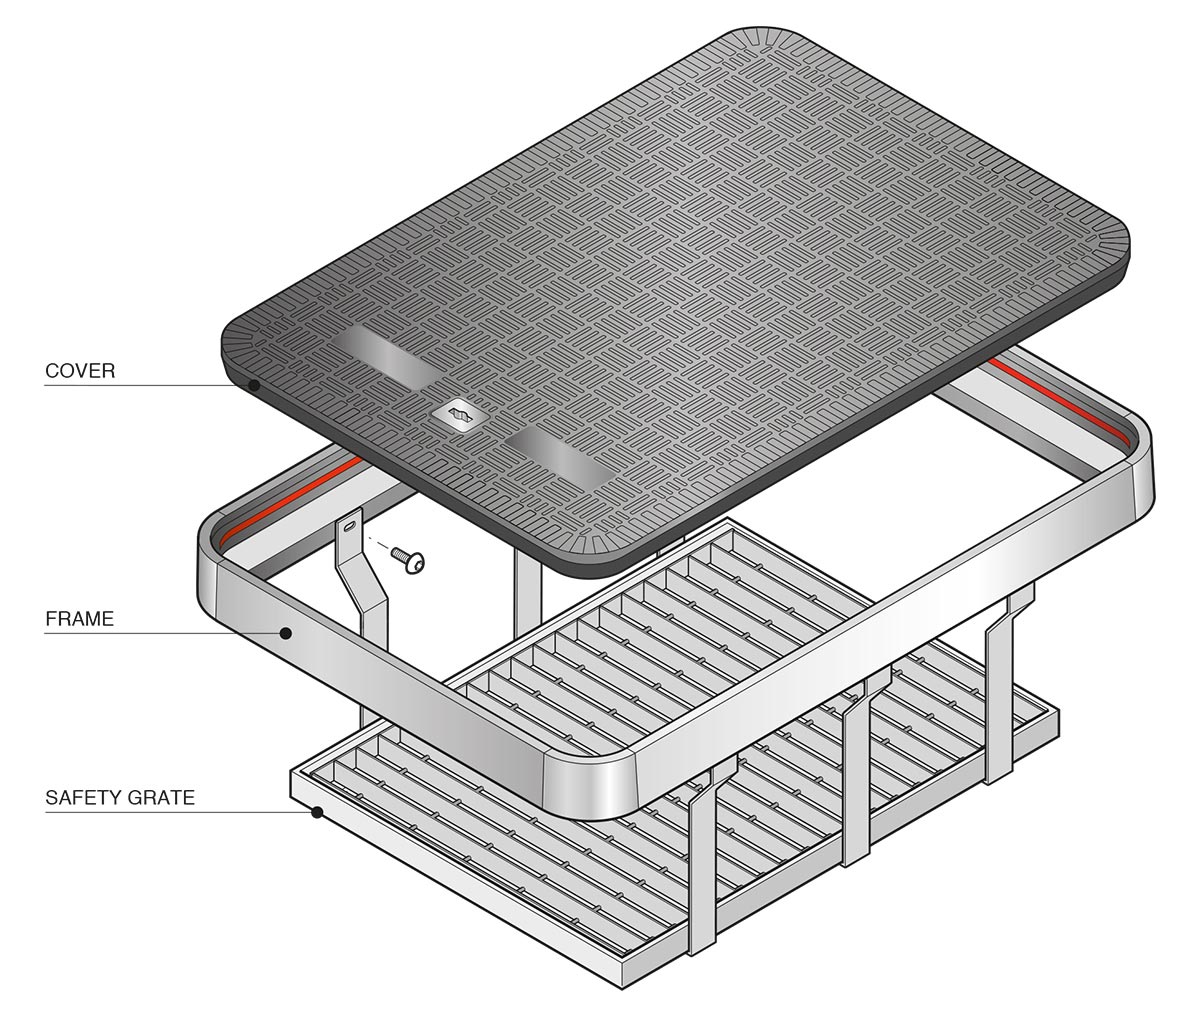 Technical Illustration - Safety Grate